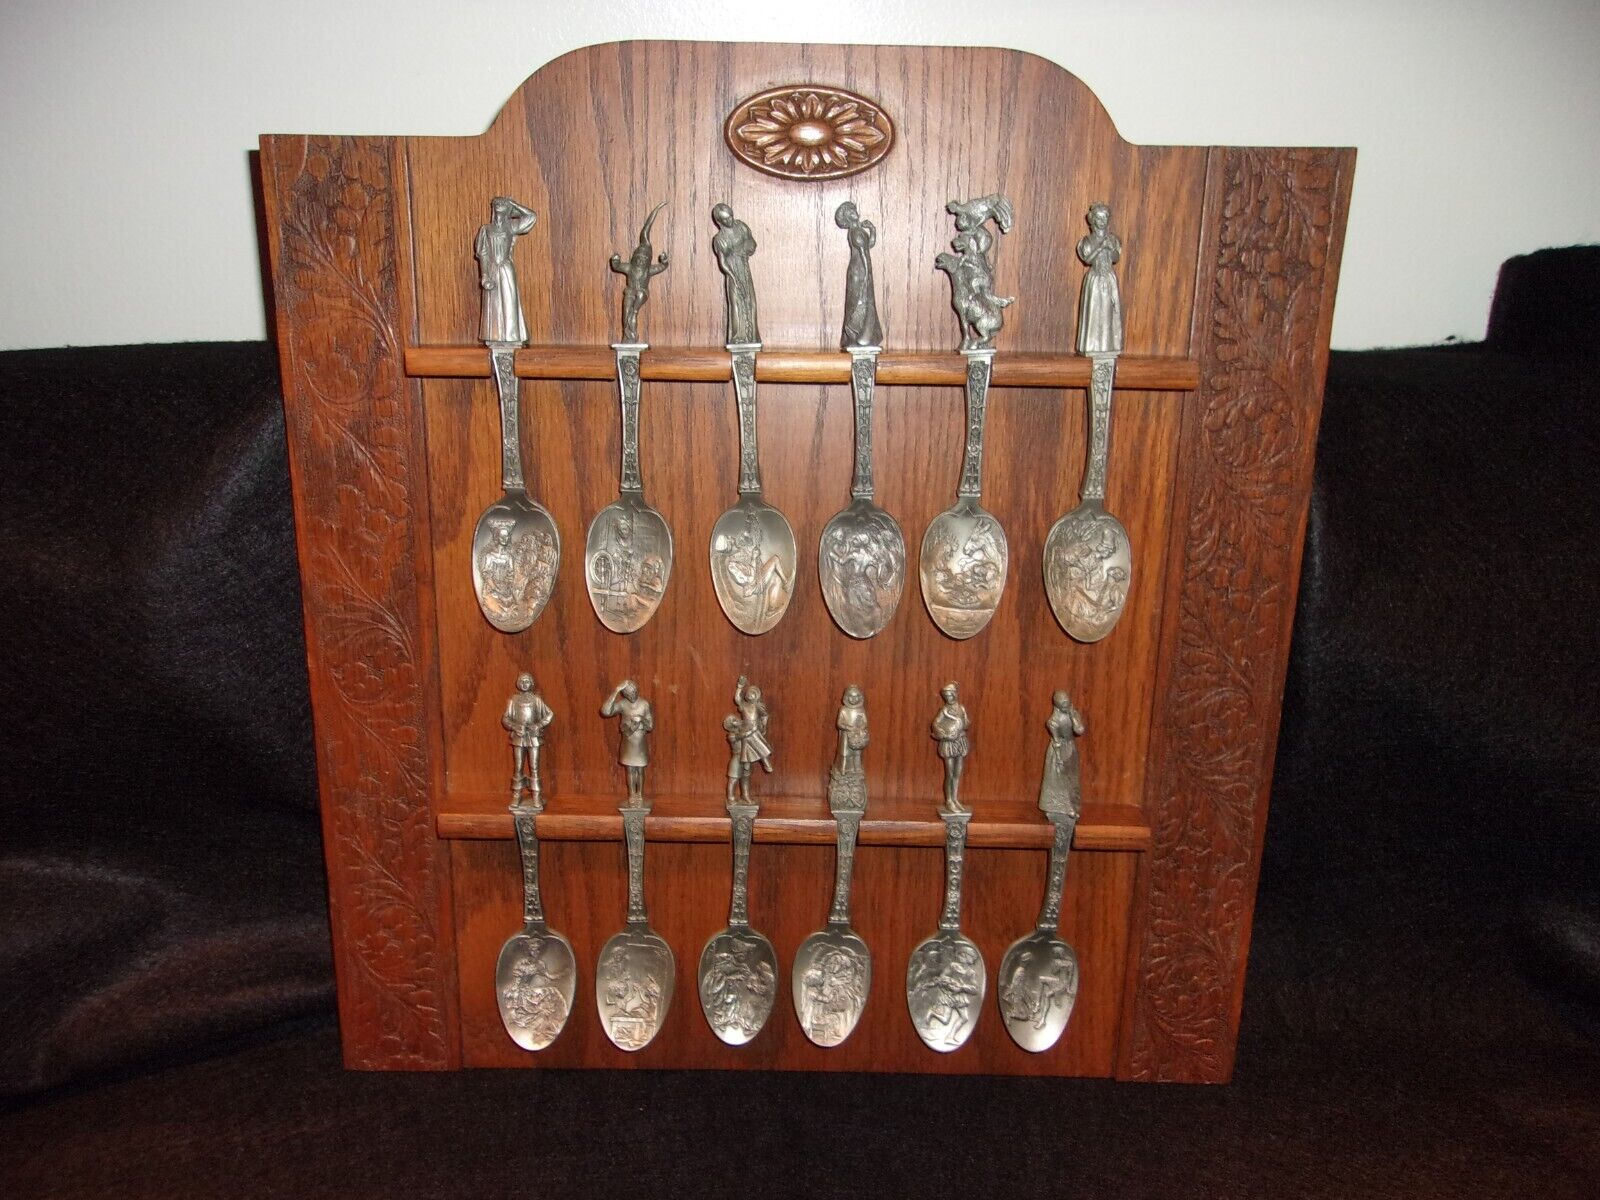 1979 Franklin Mint Brothers Grimm Pewter Fairy Tale Spoon Set Of 12 & Wood Rack